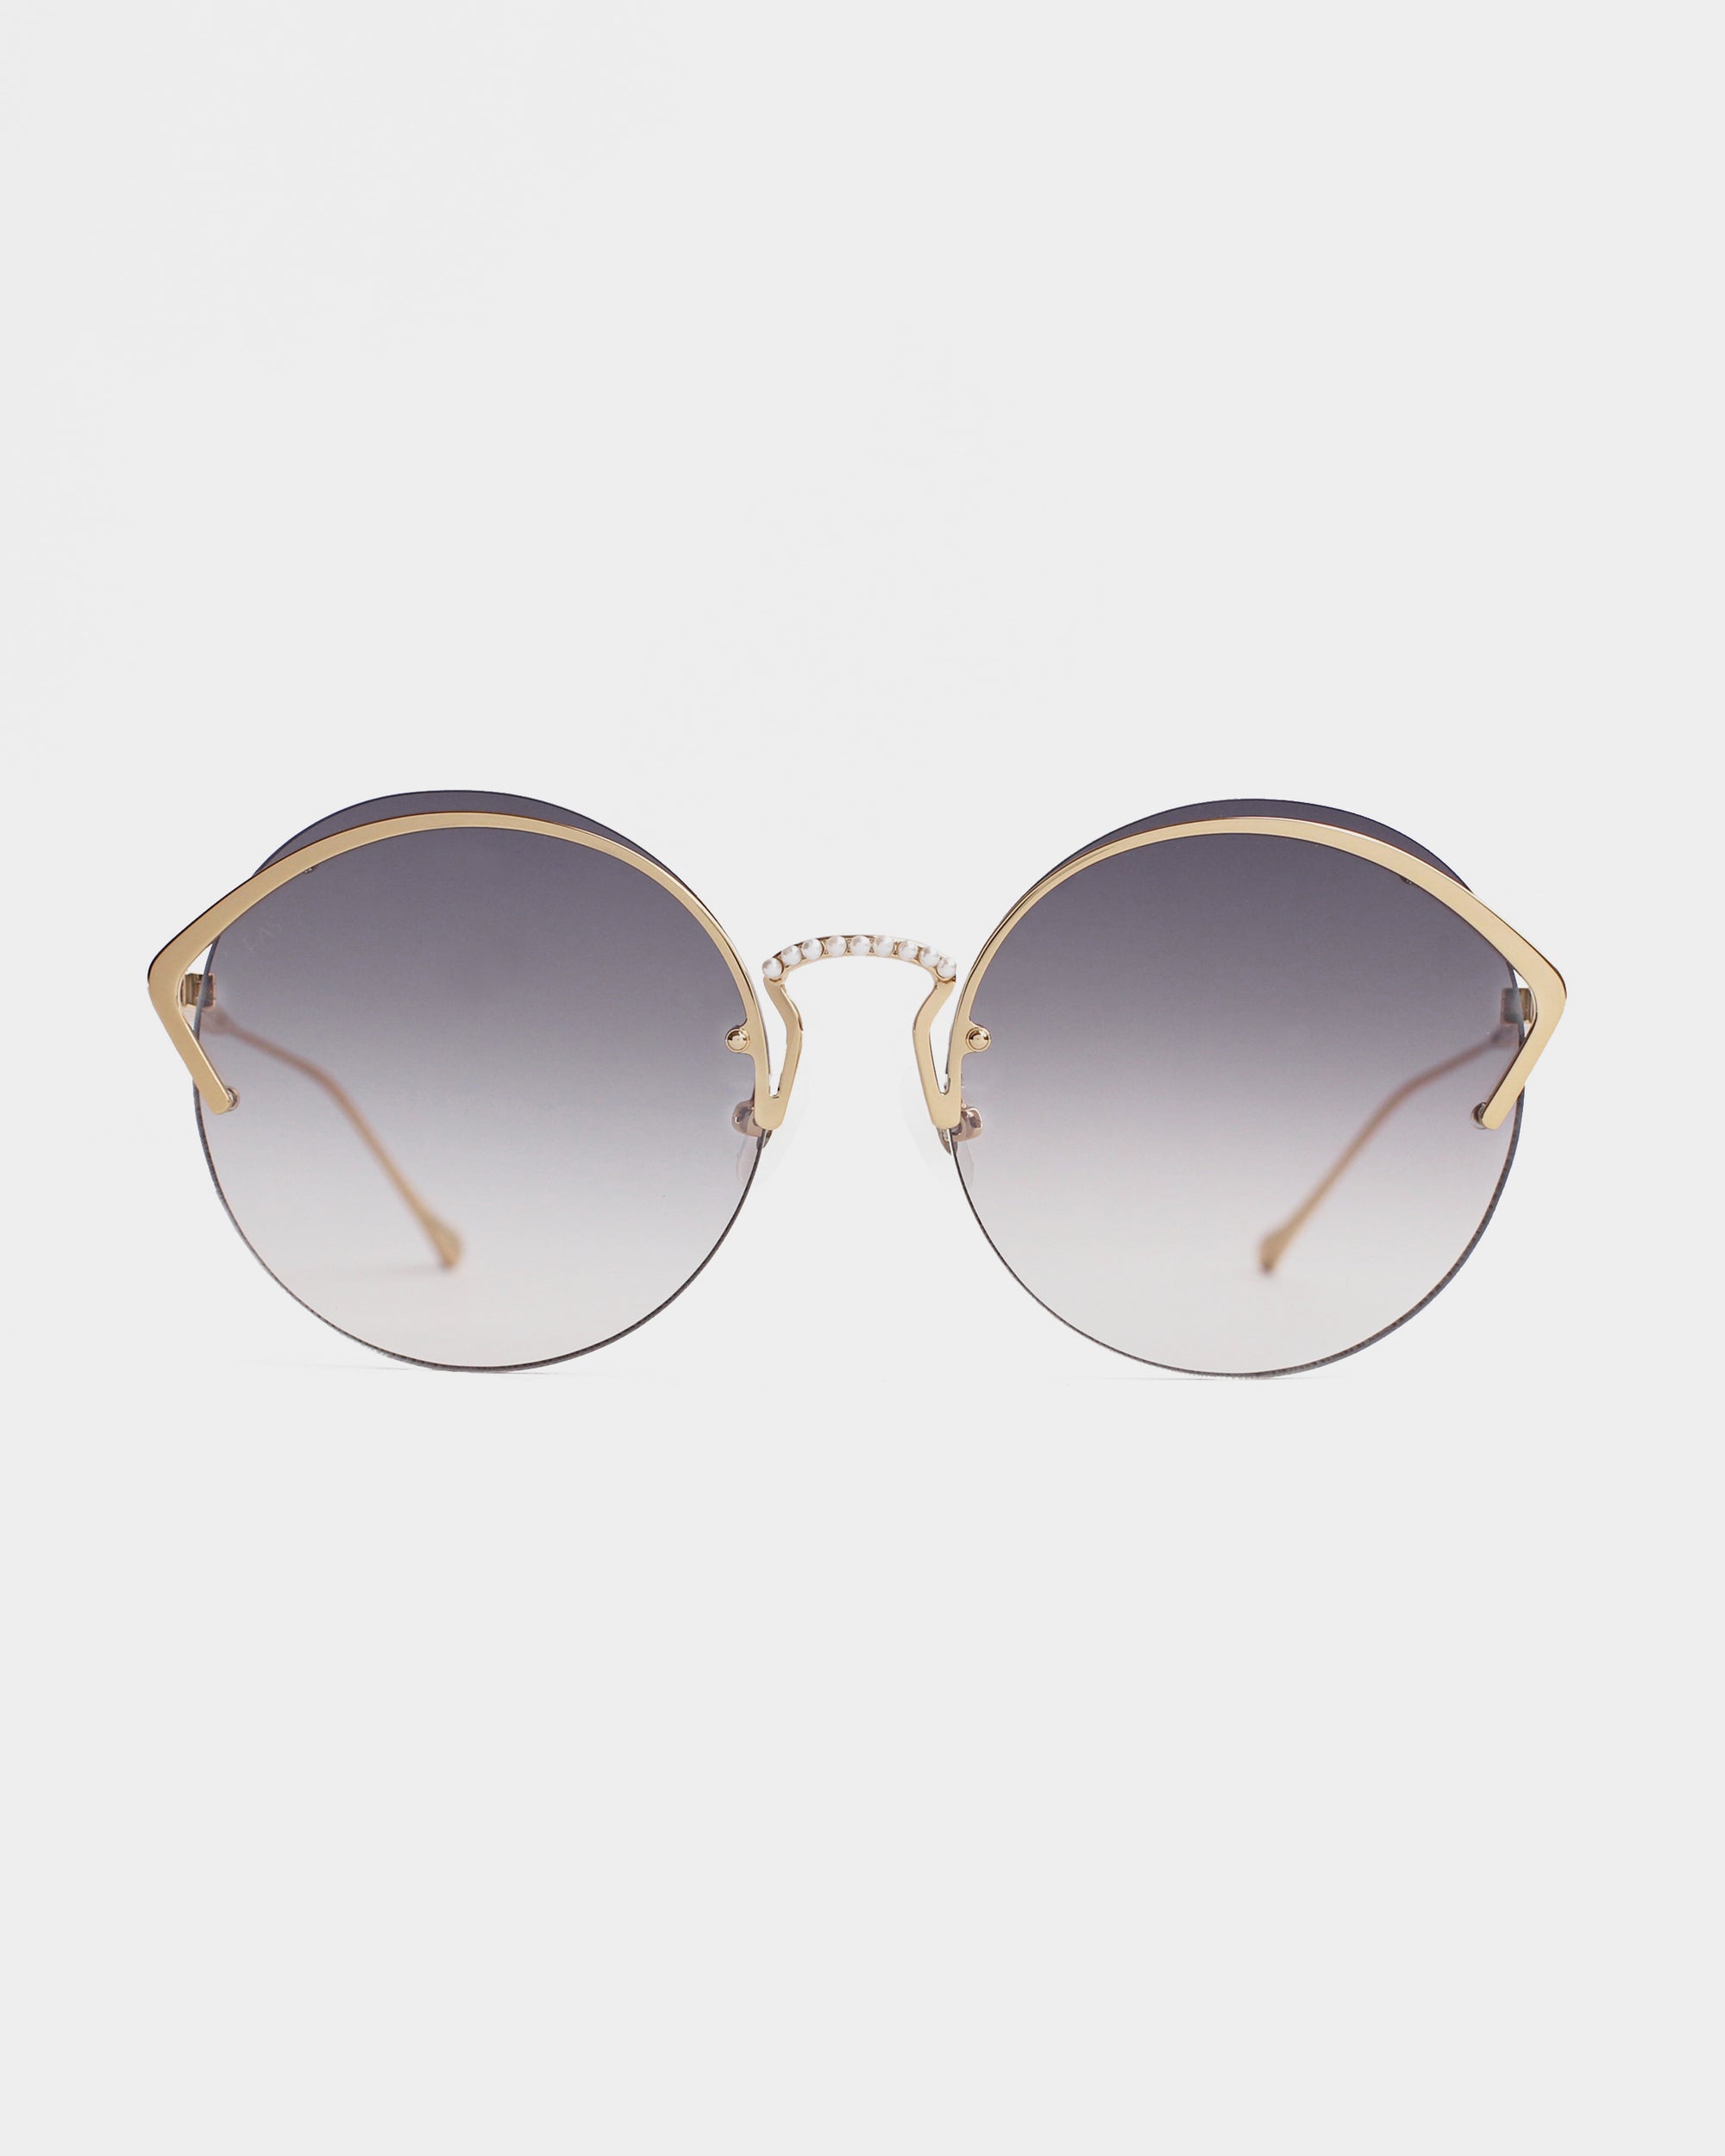 A pair of stylish round sunglasses with gradient nylon lenses fading from dark at the top to light at the bottom. The frame is gold-toned stainless steel featuring intricate metalwork near the hinges, and the nose bridge sports a small bar design, providing essential UV protection. The background is plain white. Introducing Margarita by For Art's Sake®.